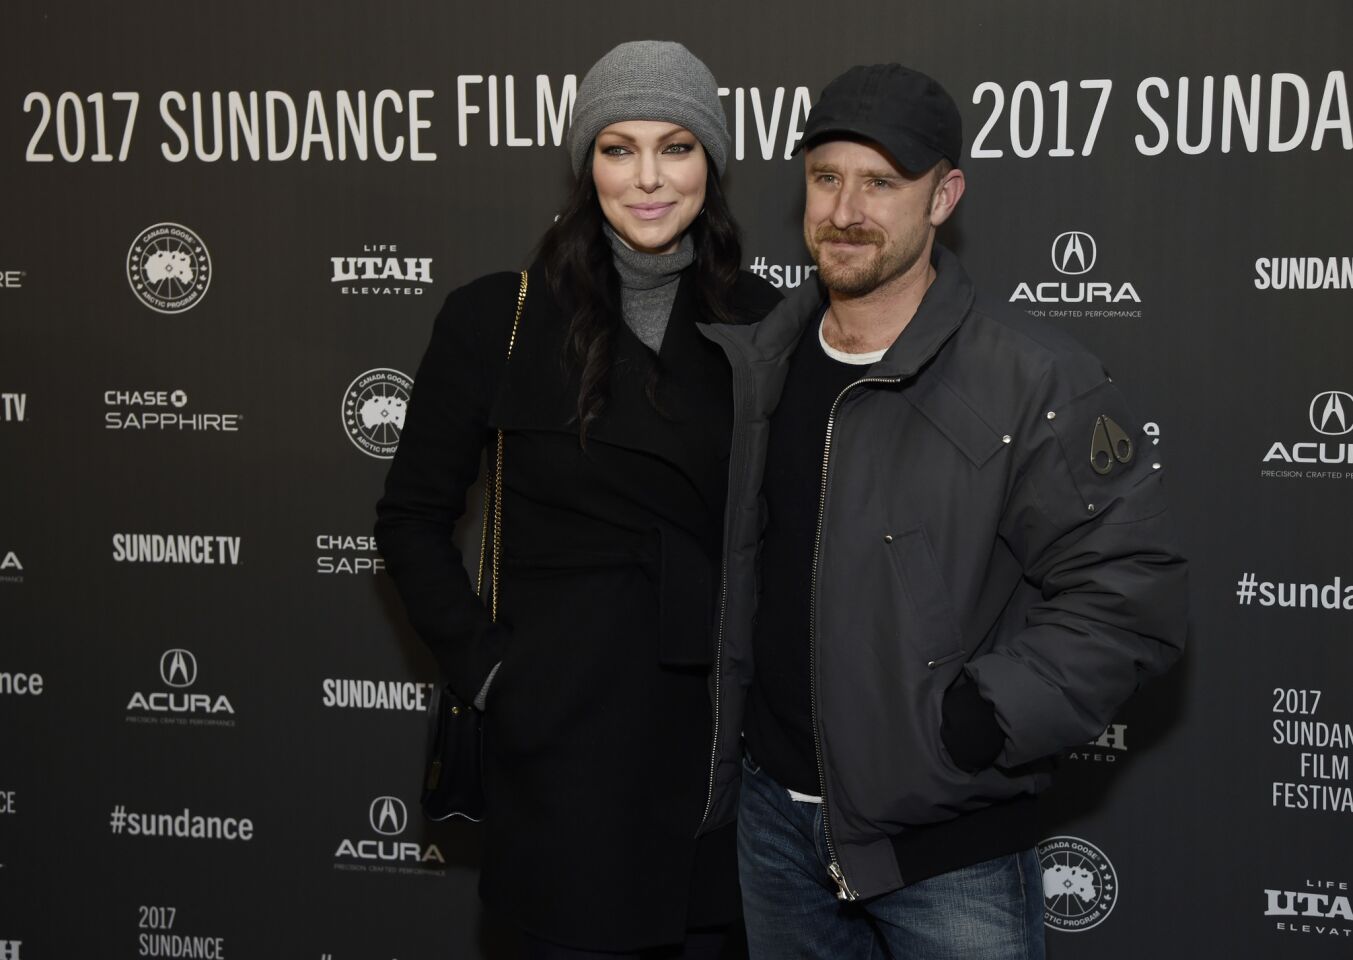 Laura Prepon, left, a cast member in "The Hero," with her fiancé, actor Ben Foster, at the premiere of the film at the Library Center Theatre.